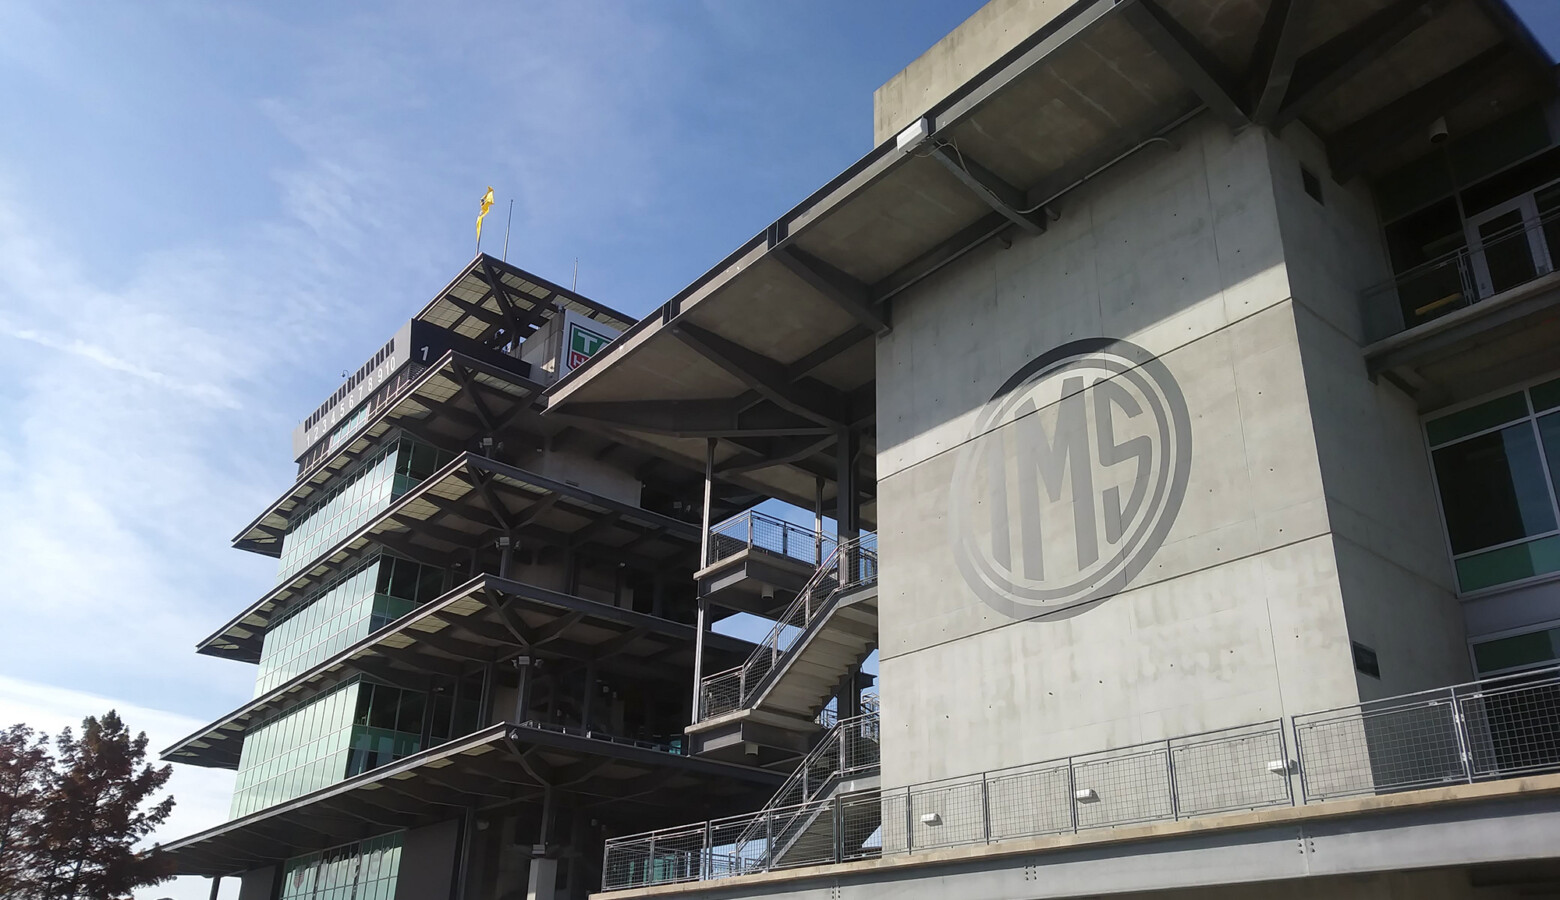 Indianapolis Motor Speedway will host the Indy 500 Aug. 23 with a limited number of spectators. (Lauren Chapman/IPB News)